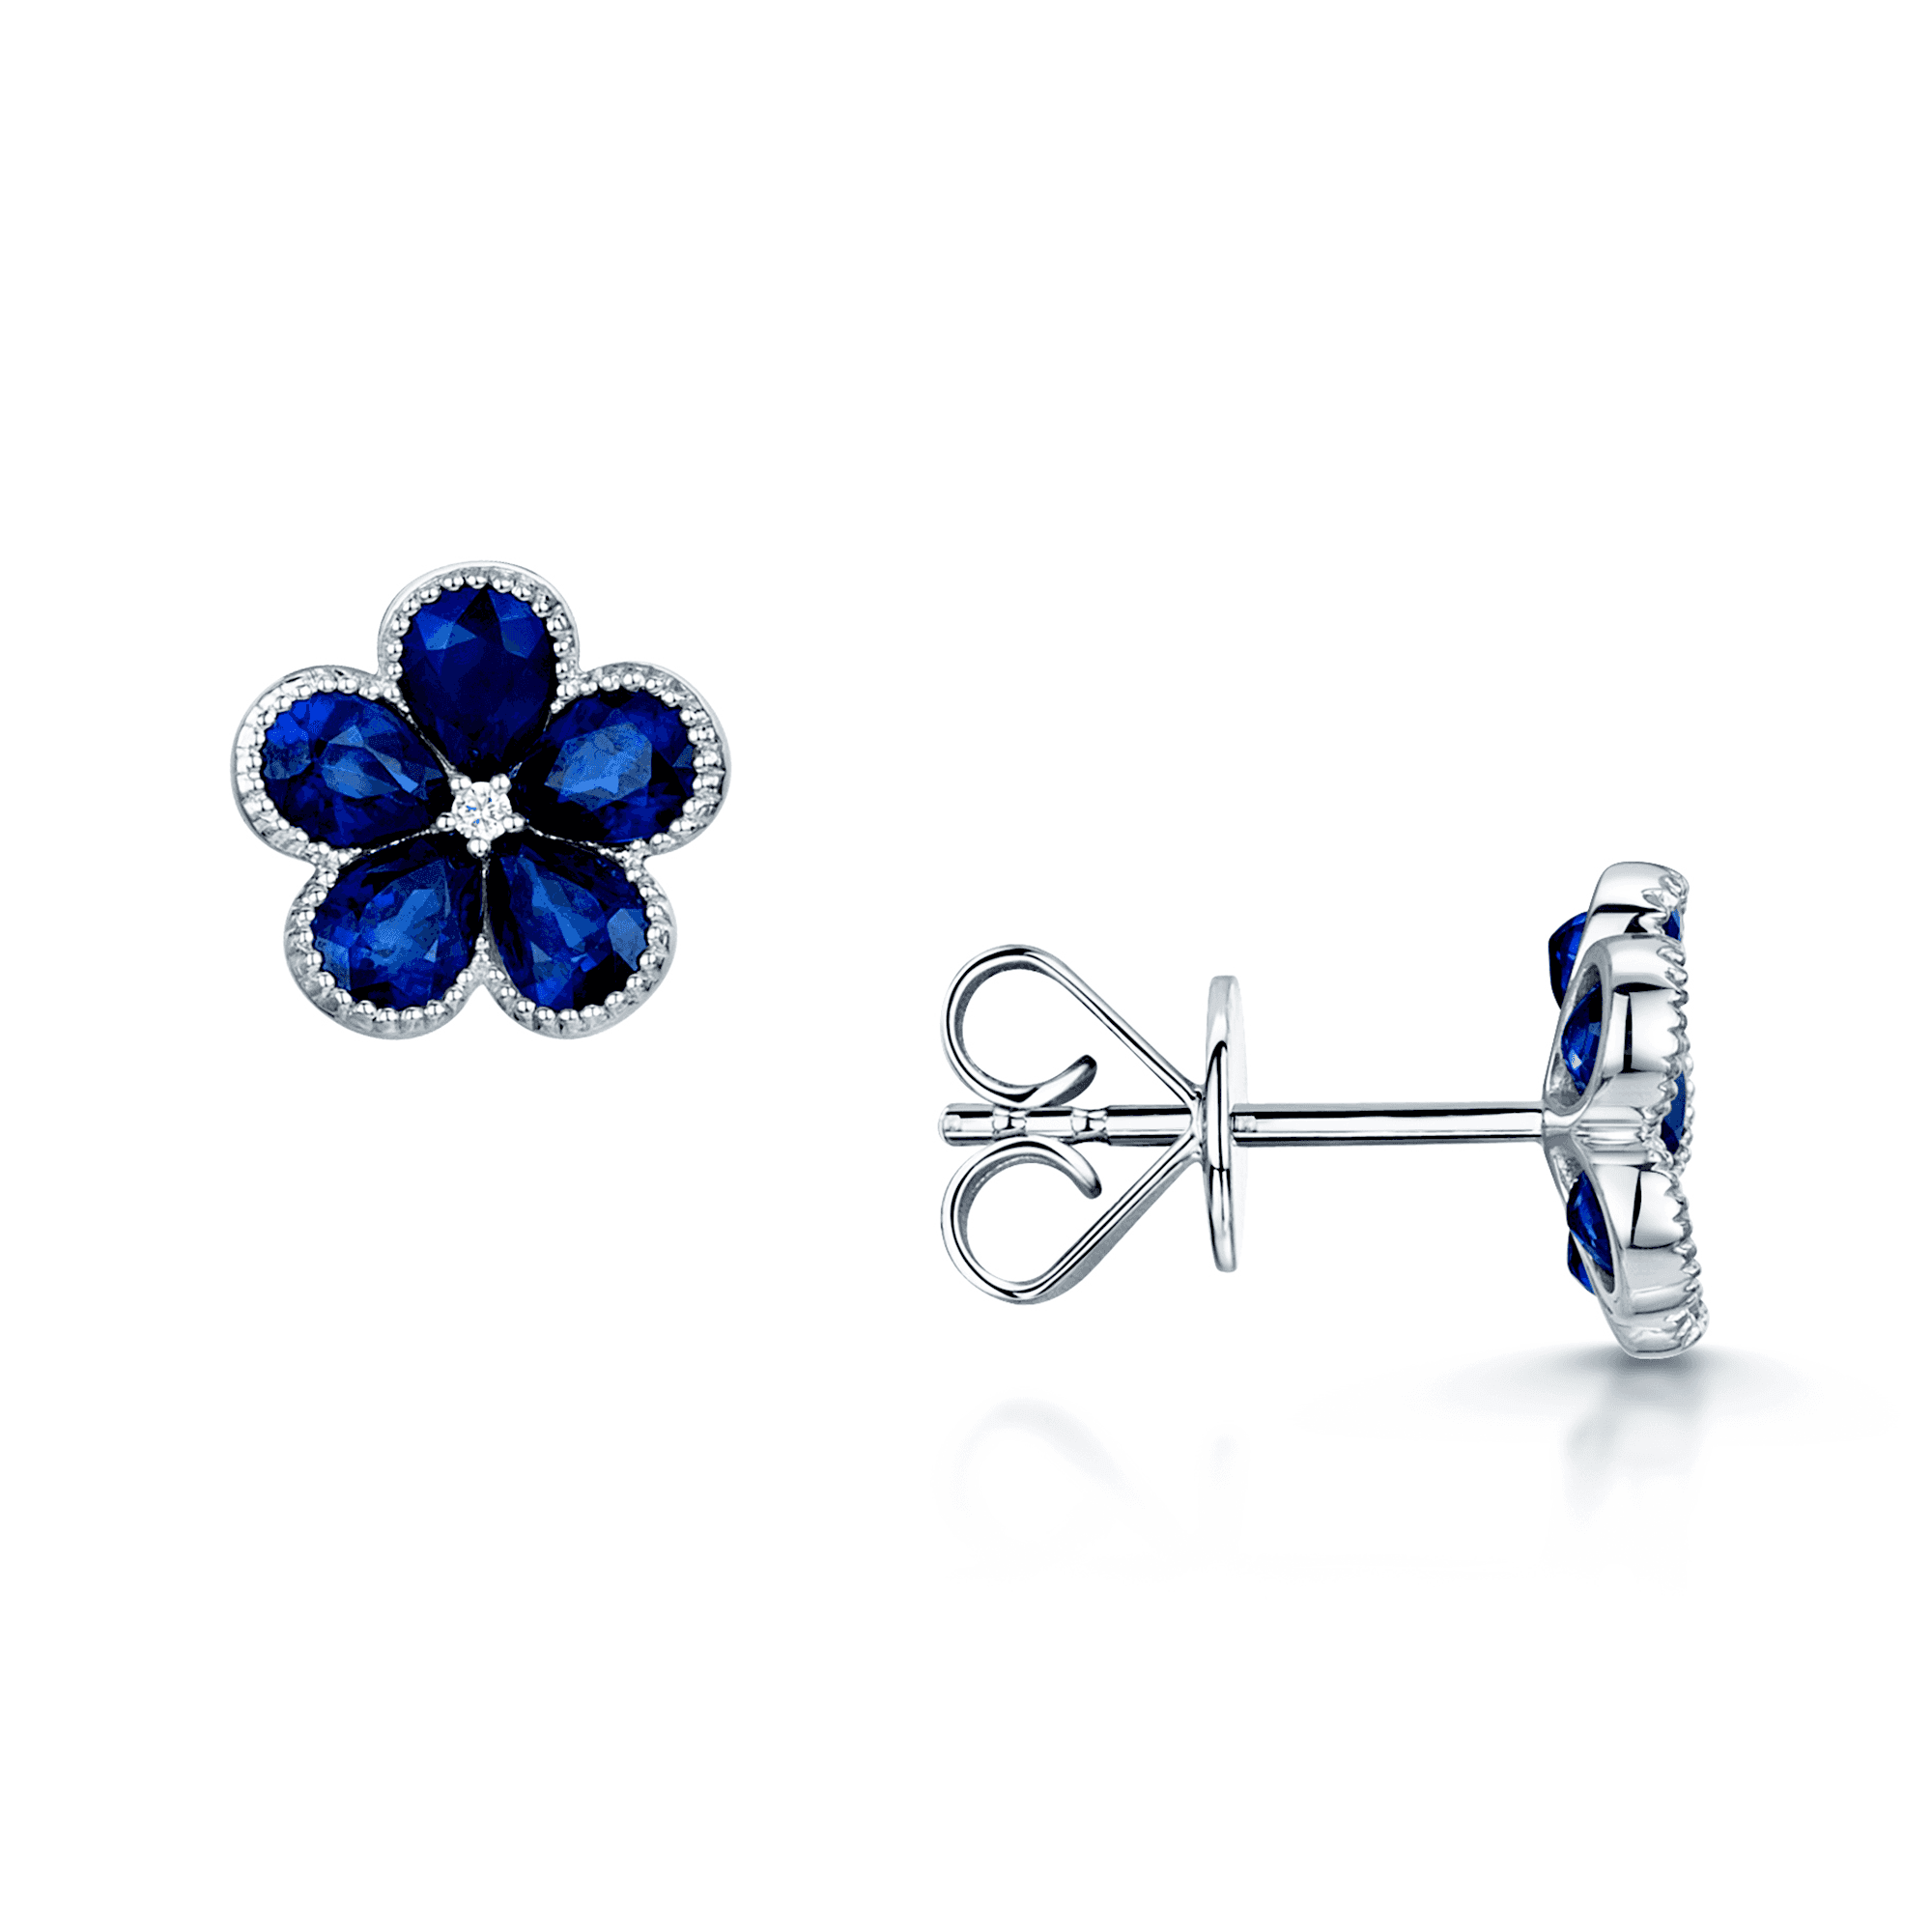 18ct White Gold Pear Cut Sapphire And Diamond Flower Stud Earrings